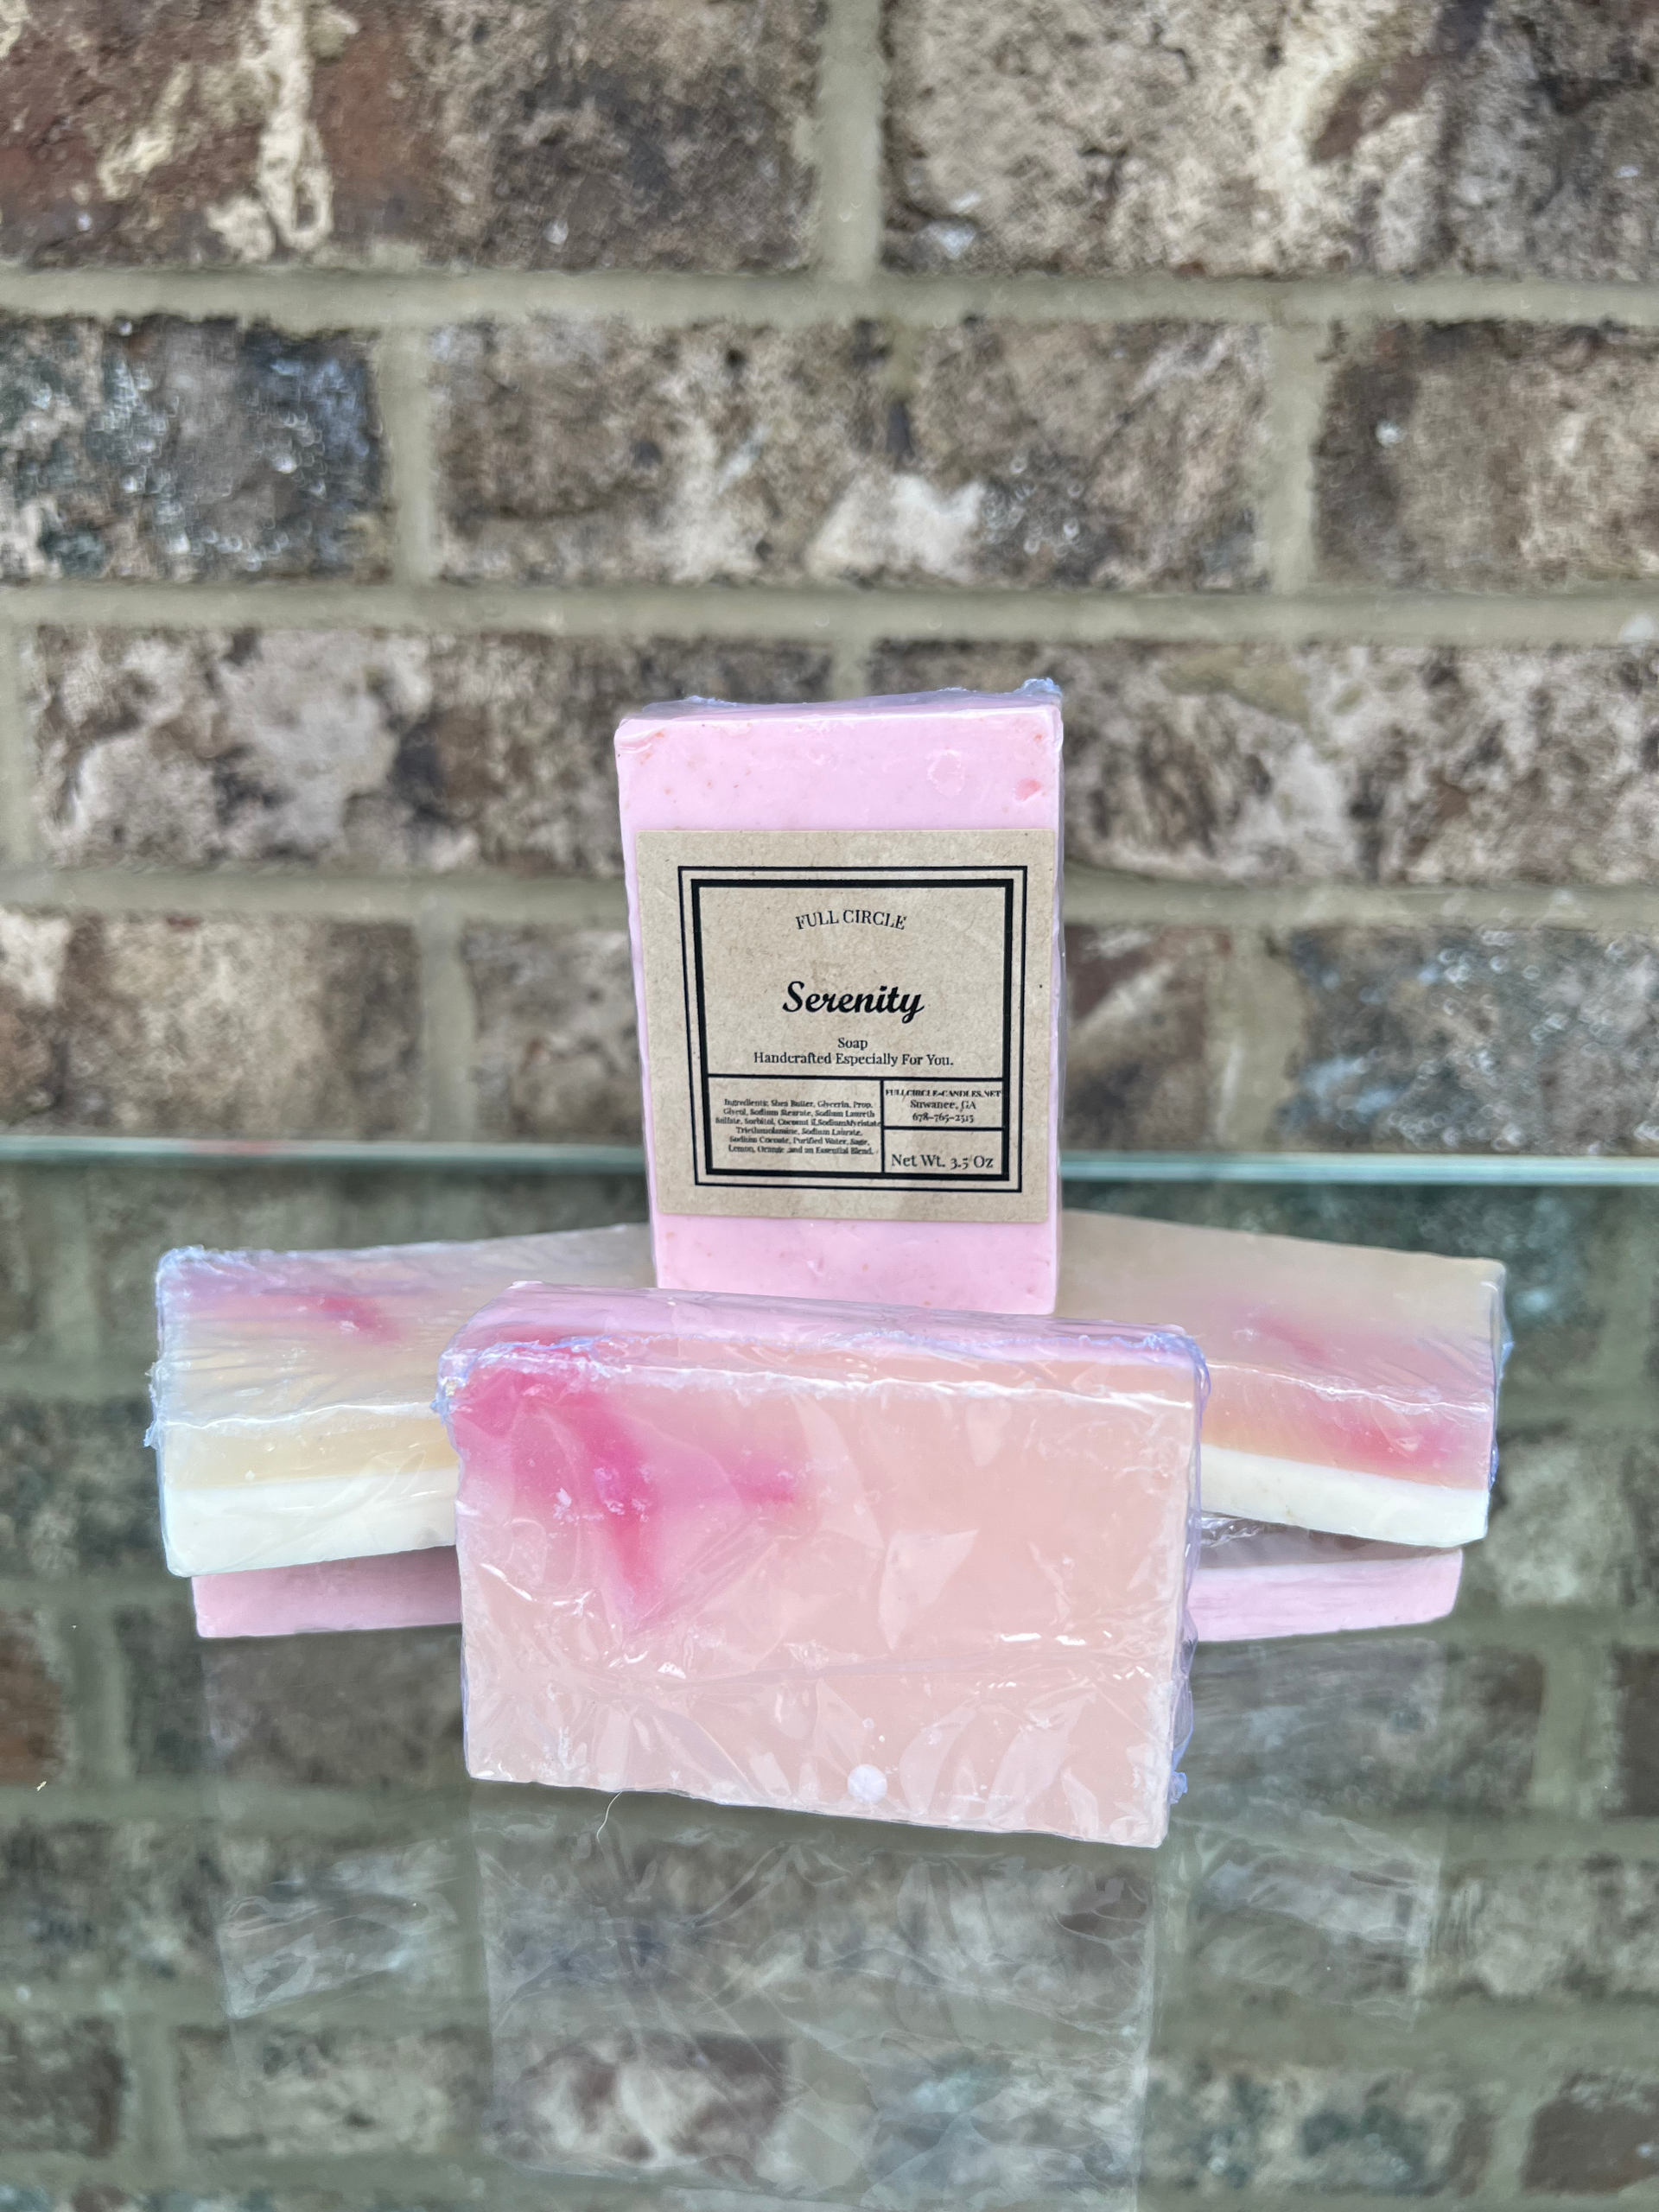 Breast Cancer Awareness Soaps "Serenity"